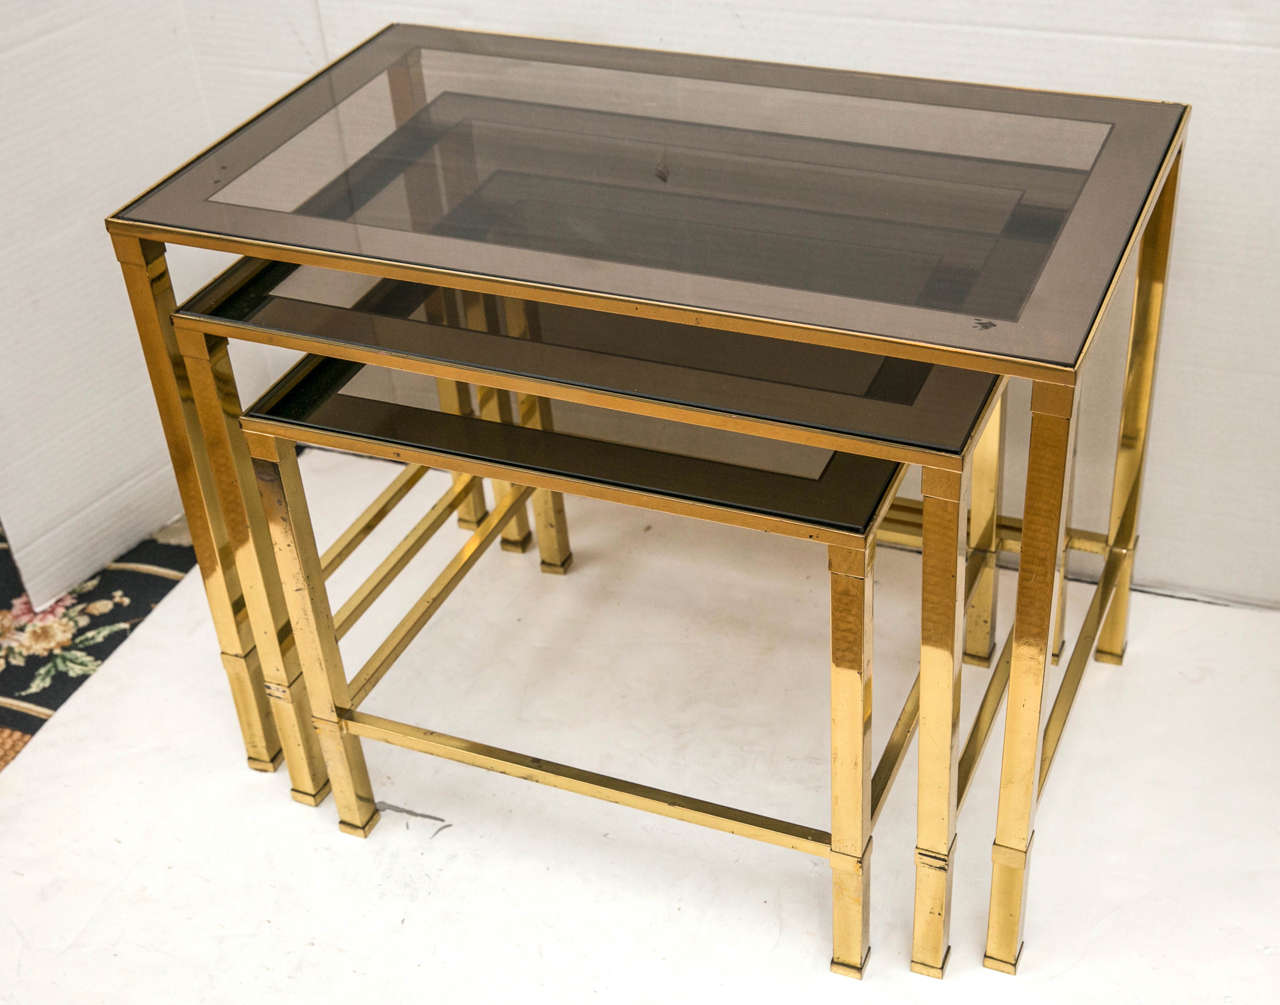 A Set of three Mid-century french nesting tables. The bases are polished brass, and the glass tops feature smoked glass edges.